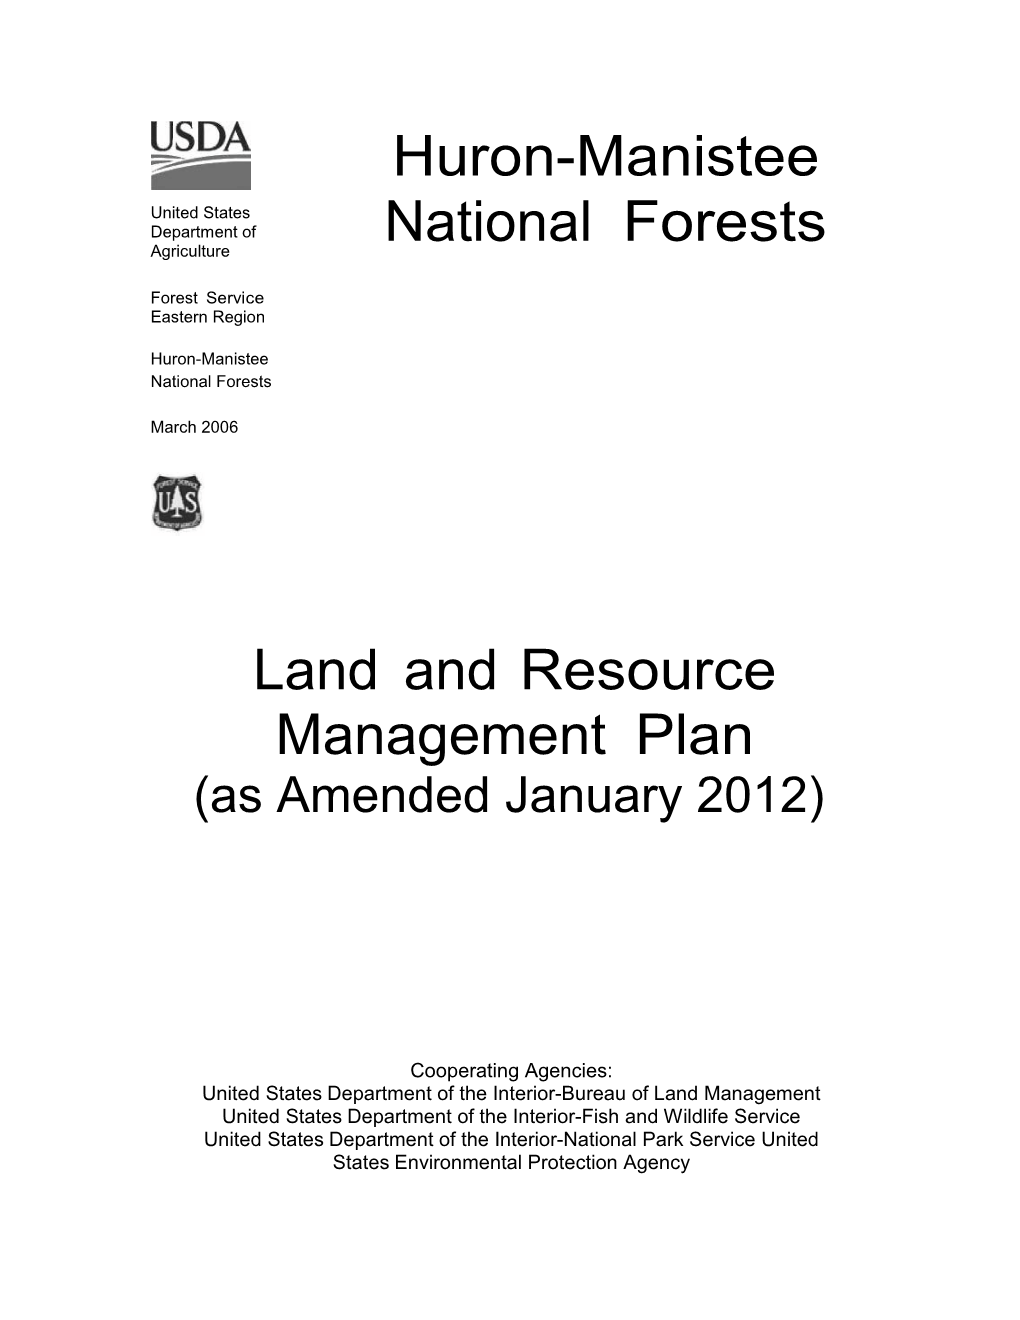 Huron-Manistee National Forests Land and Resource Management